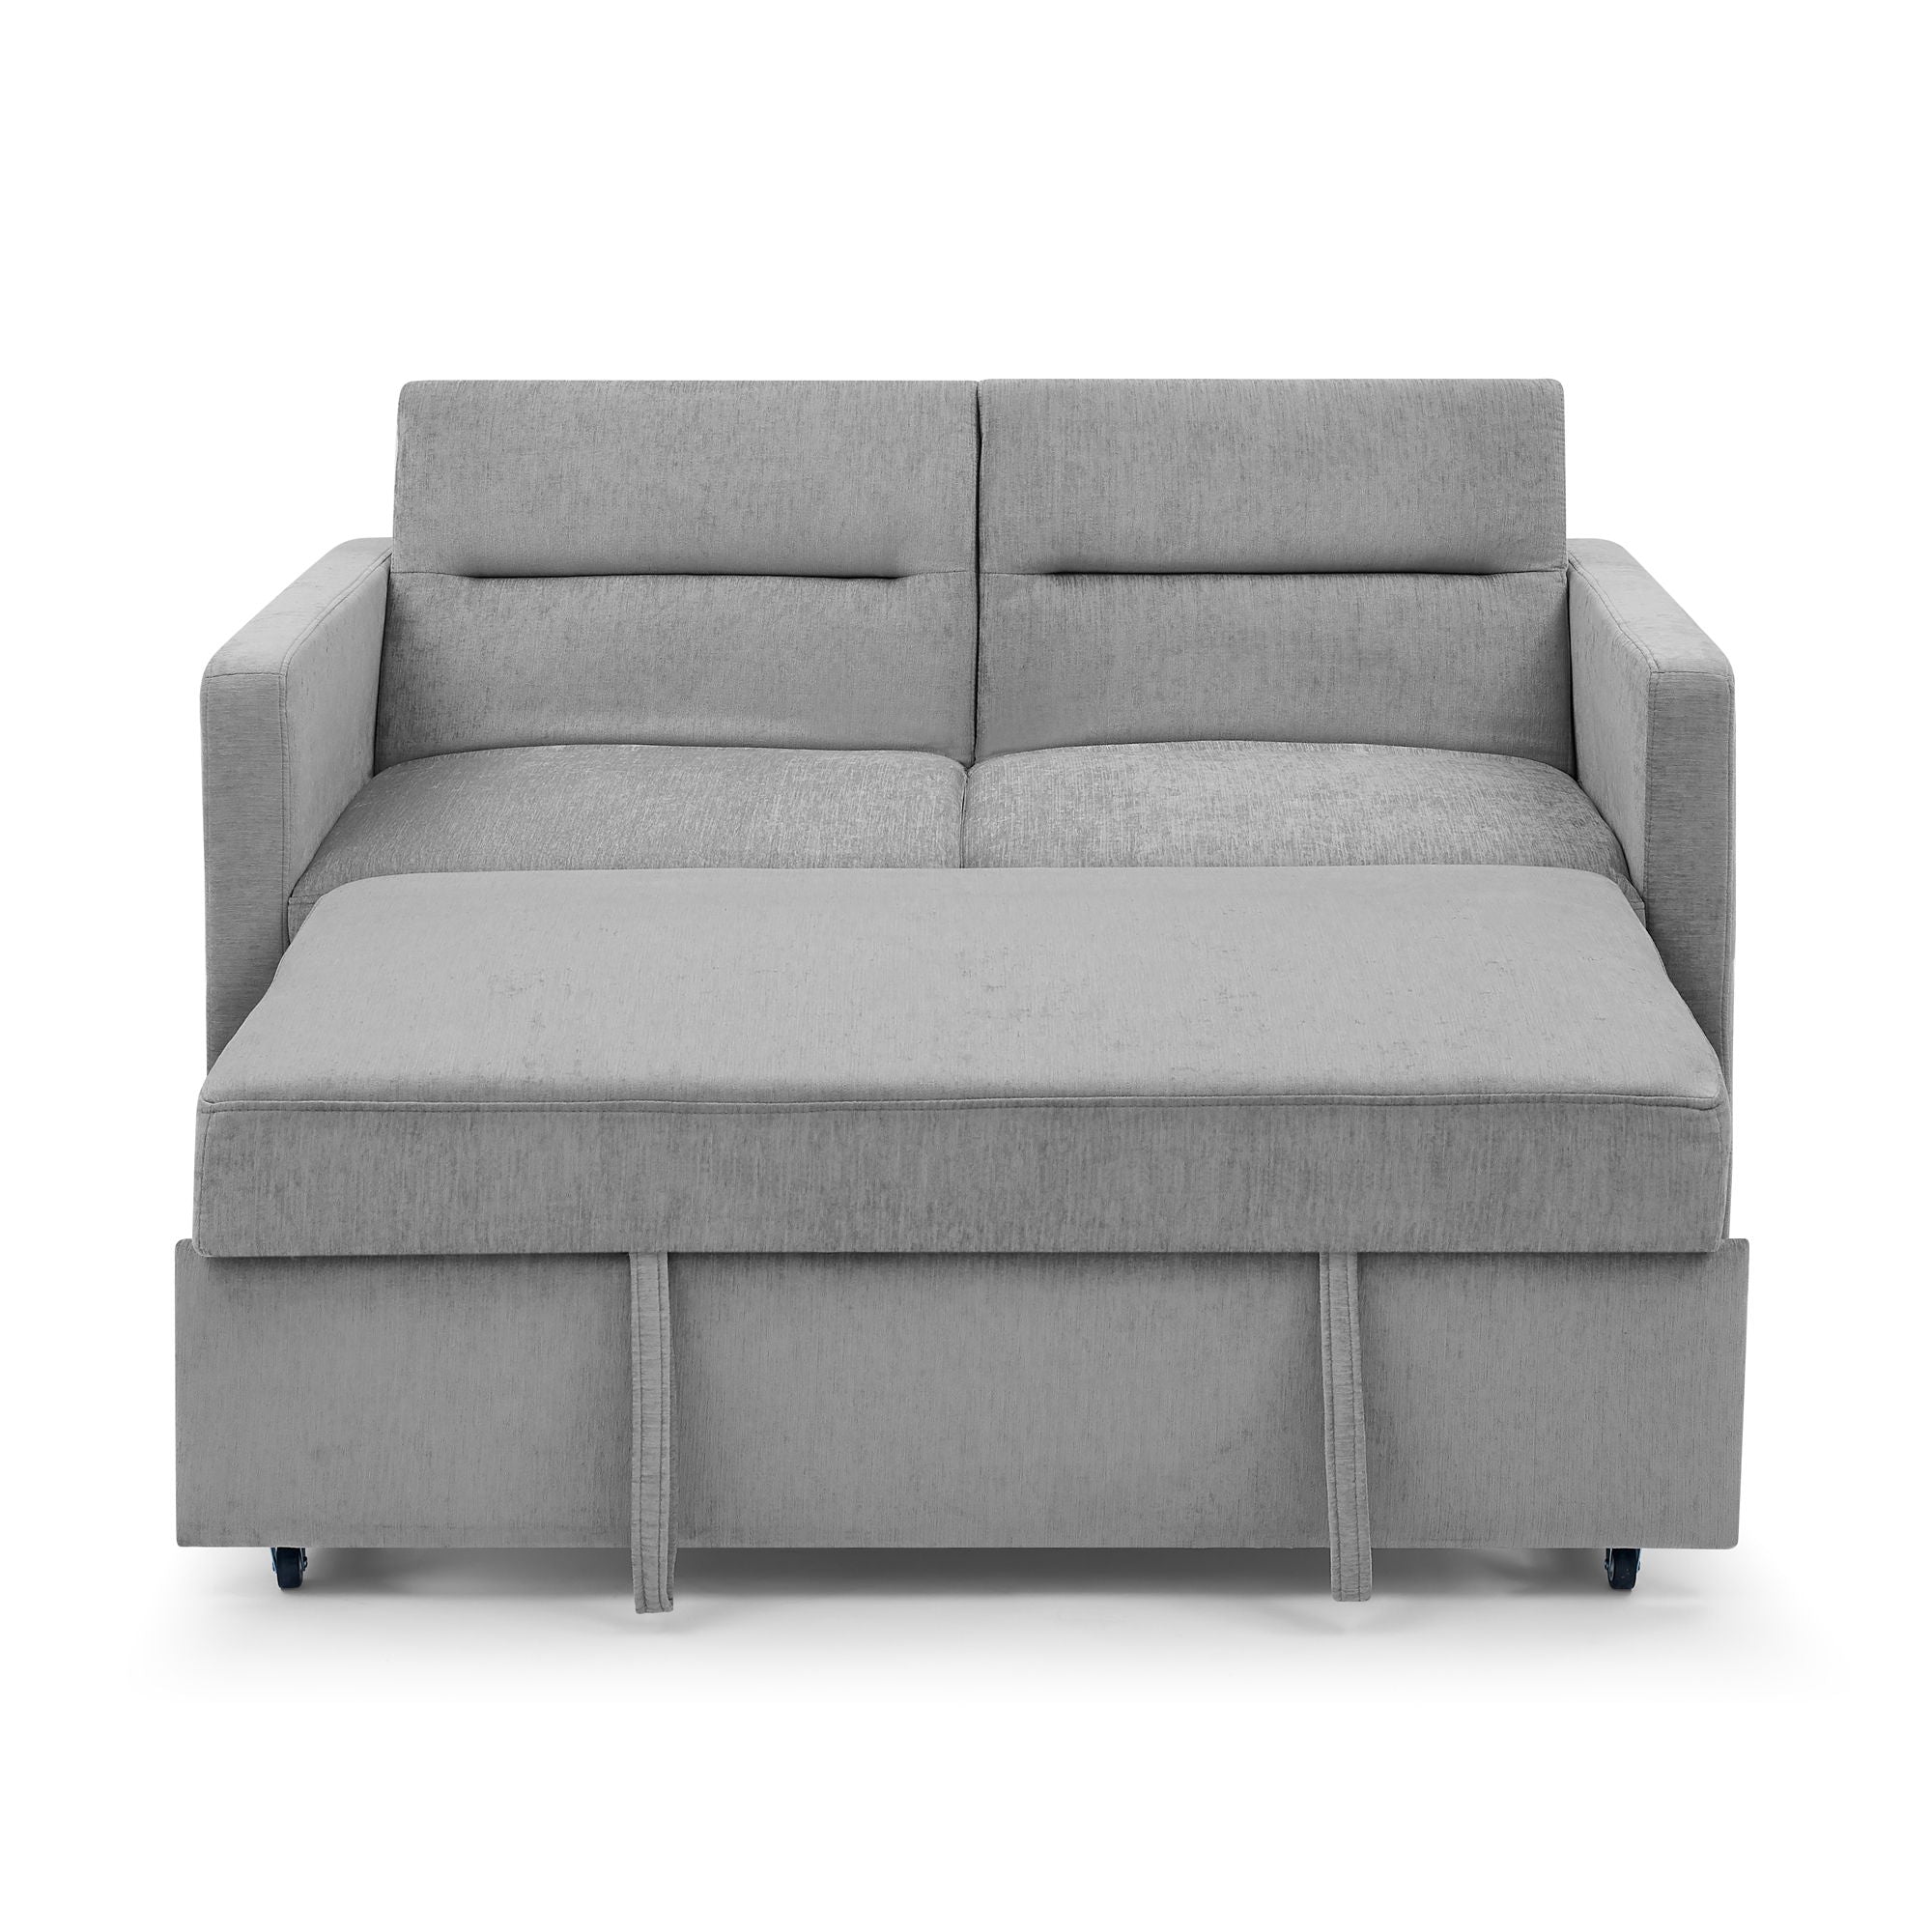 Loveseats Sofa Bed With Pull - Out Bed, Adjsutable Back And Two Arm Pocket, Grey